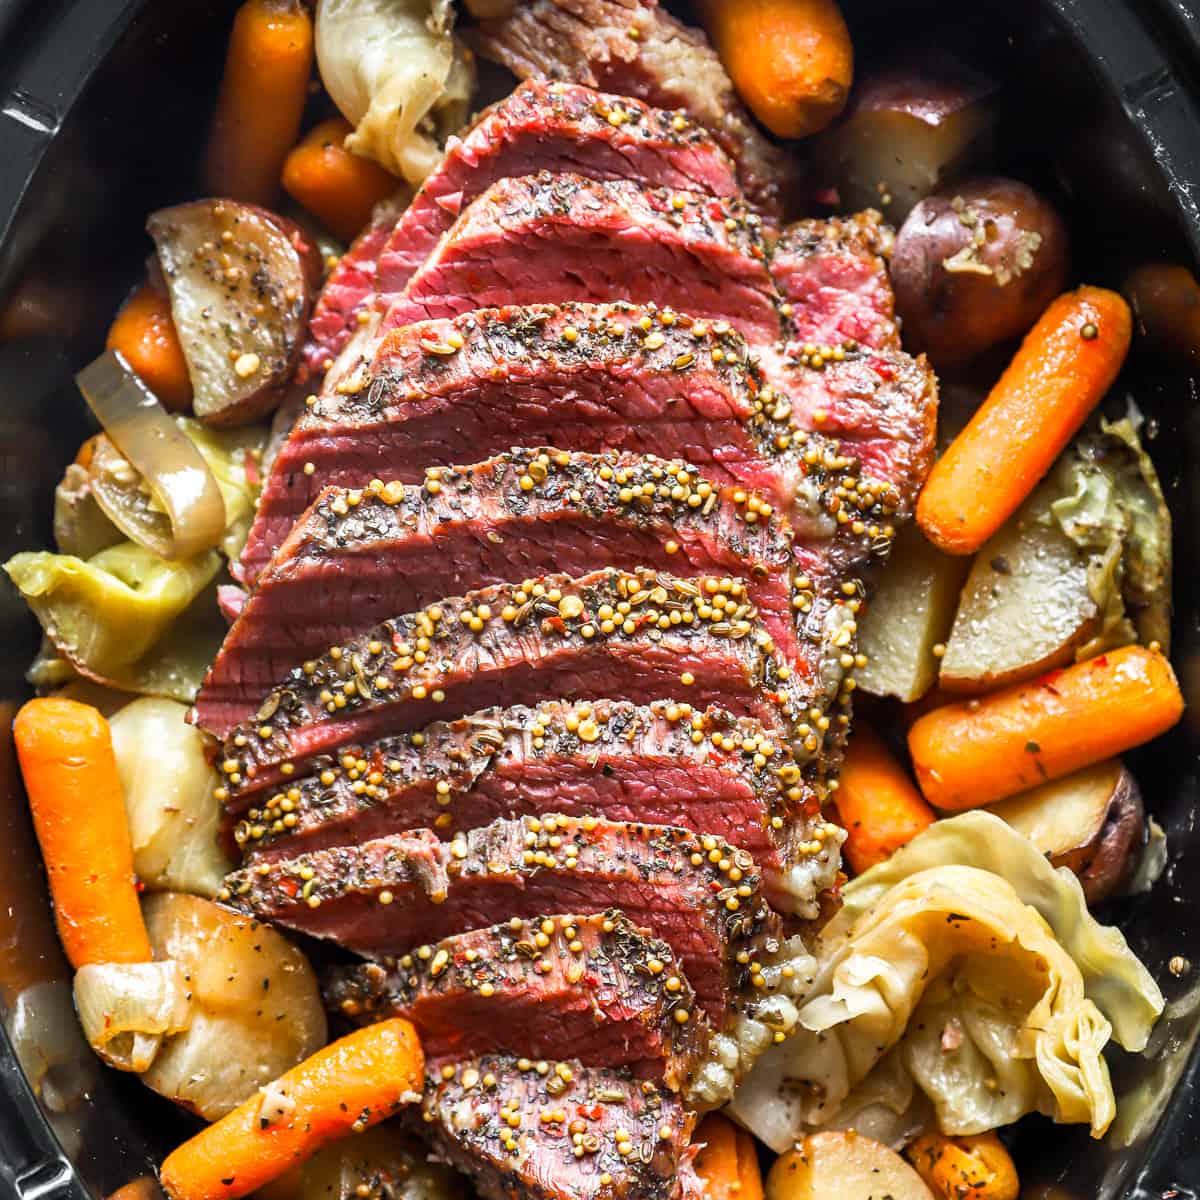 https://www.thecookierookie.com/wp-content/uploads/2023/03/featured-crockpot-corned-beef-and-cabbage-recipe.jpg